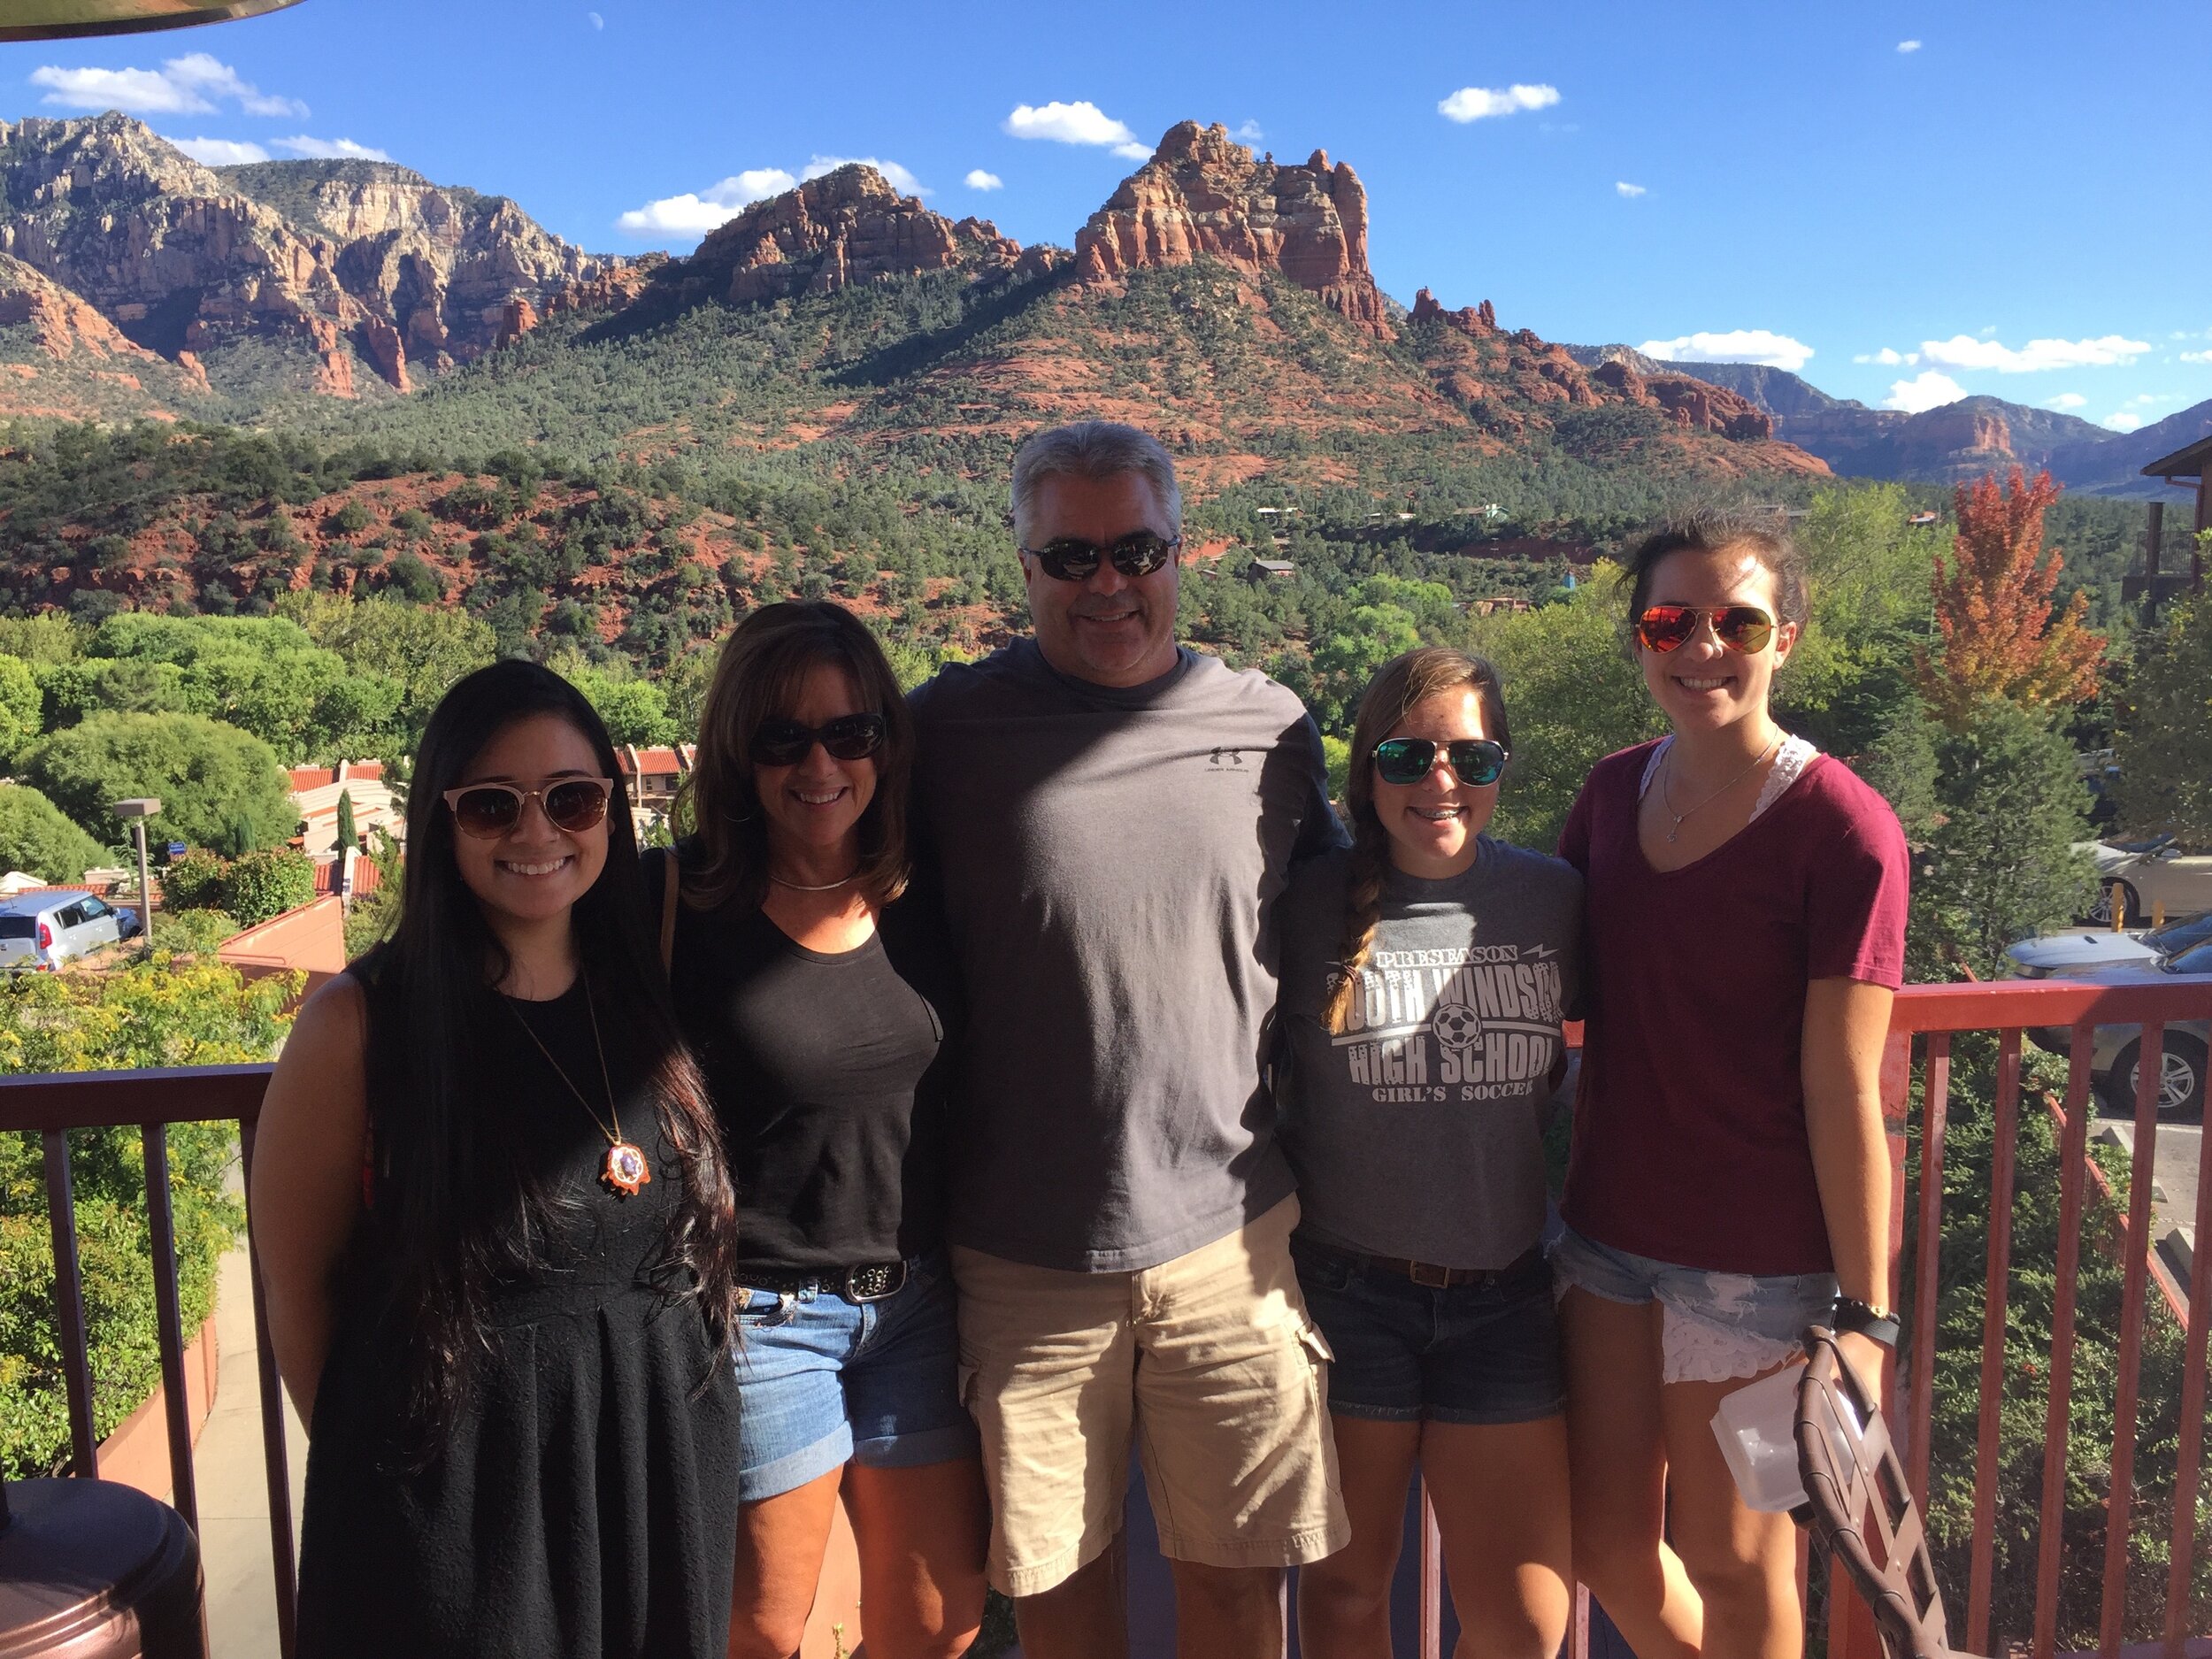 A visual of said angry parents in the Sedona paradise that inspired our travels